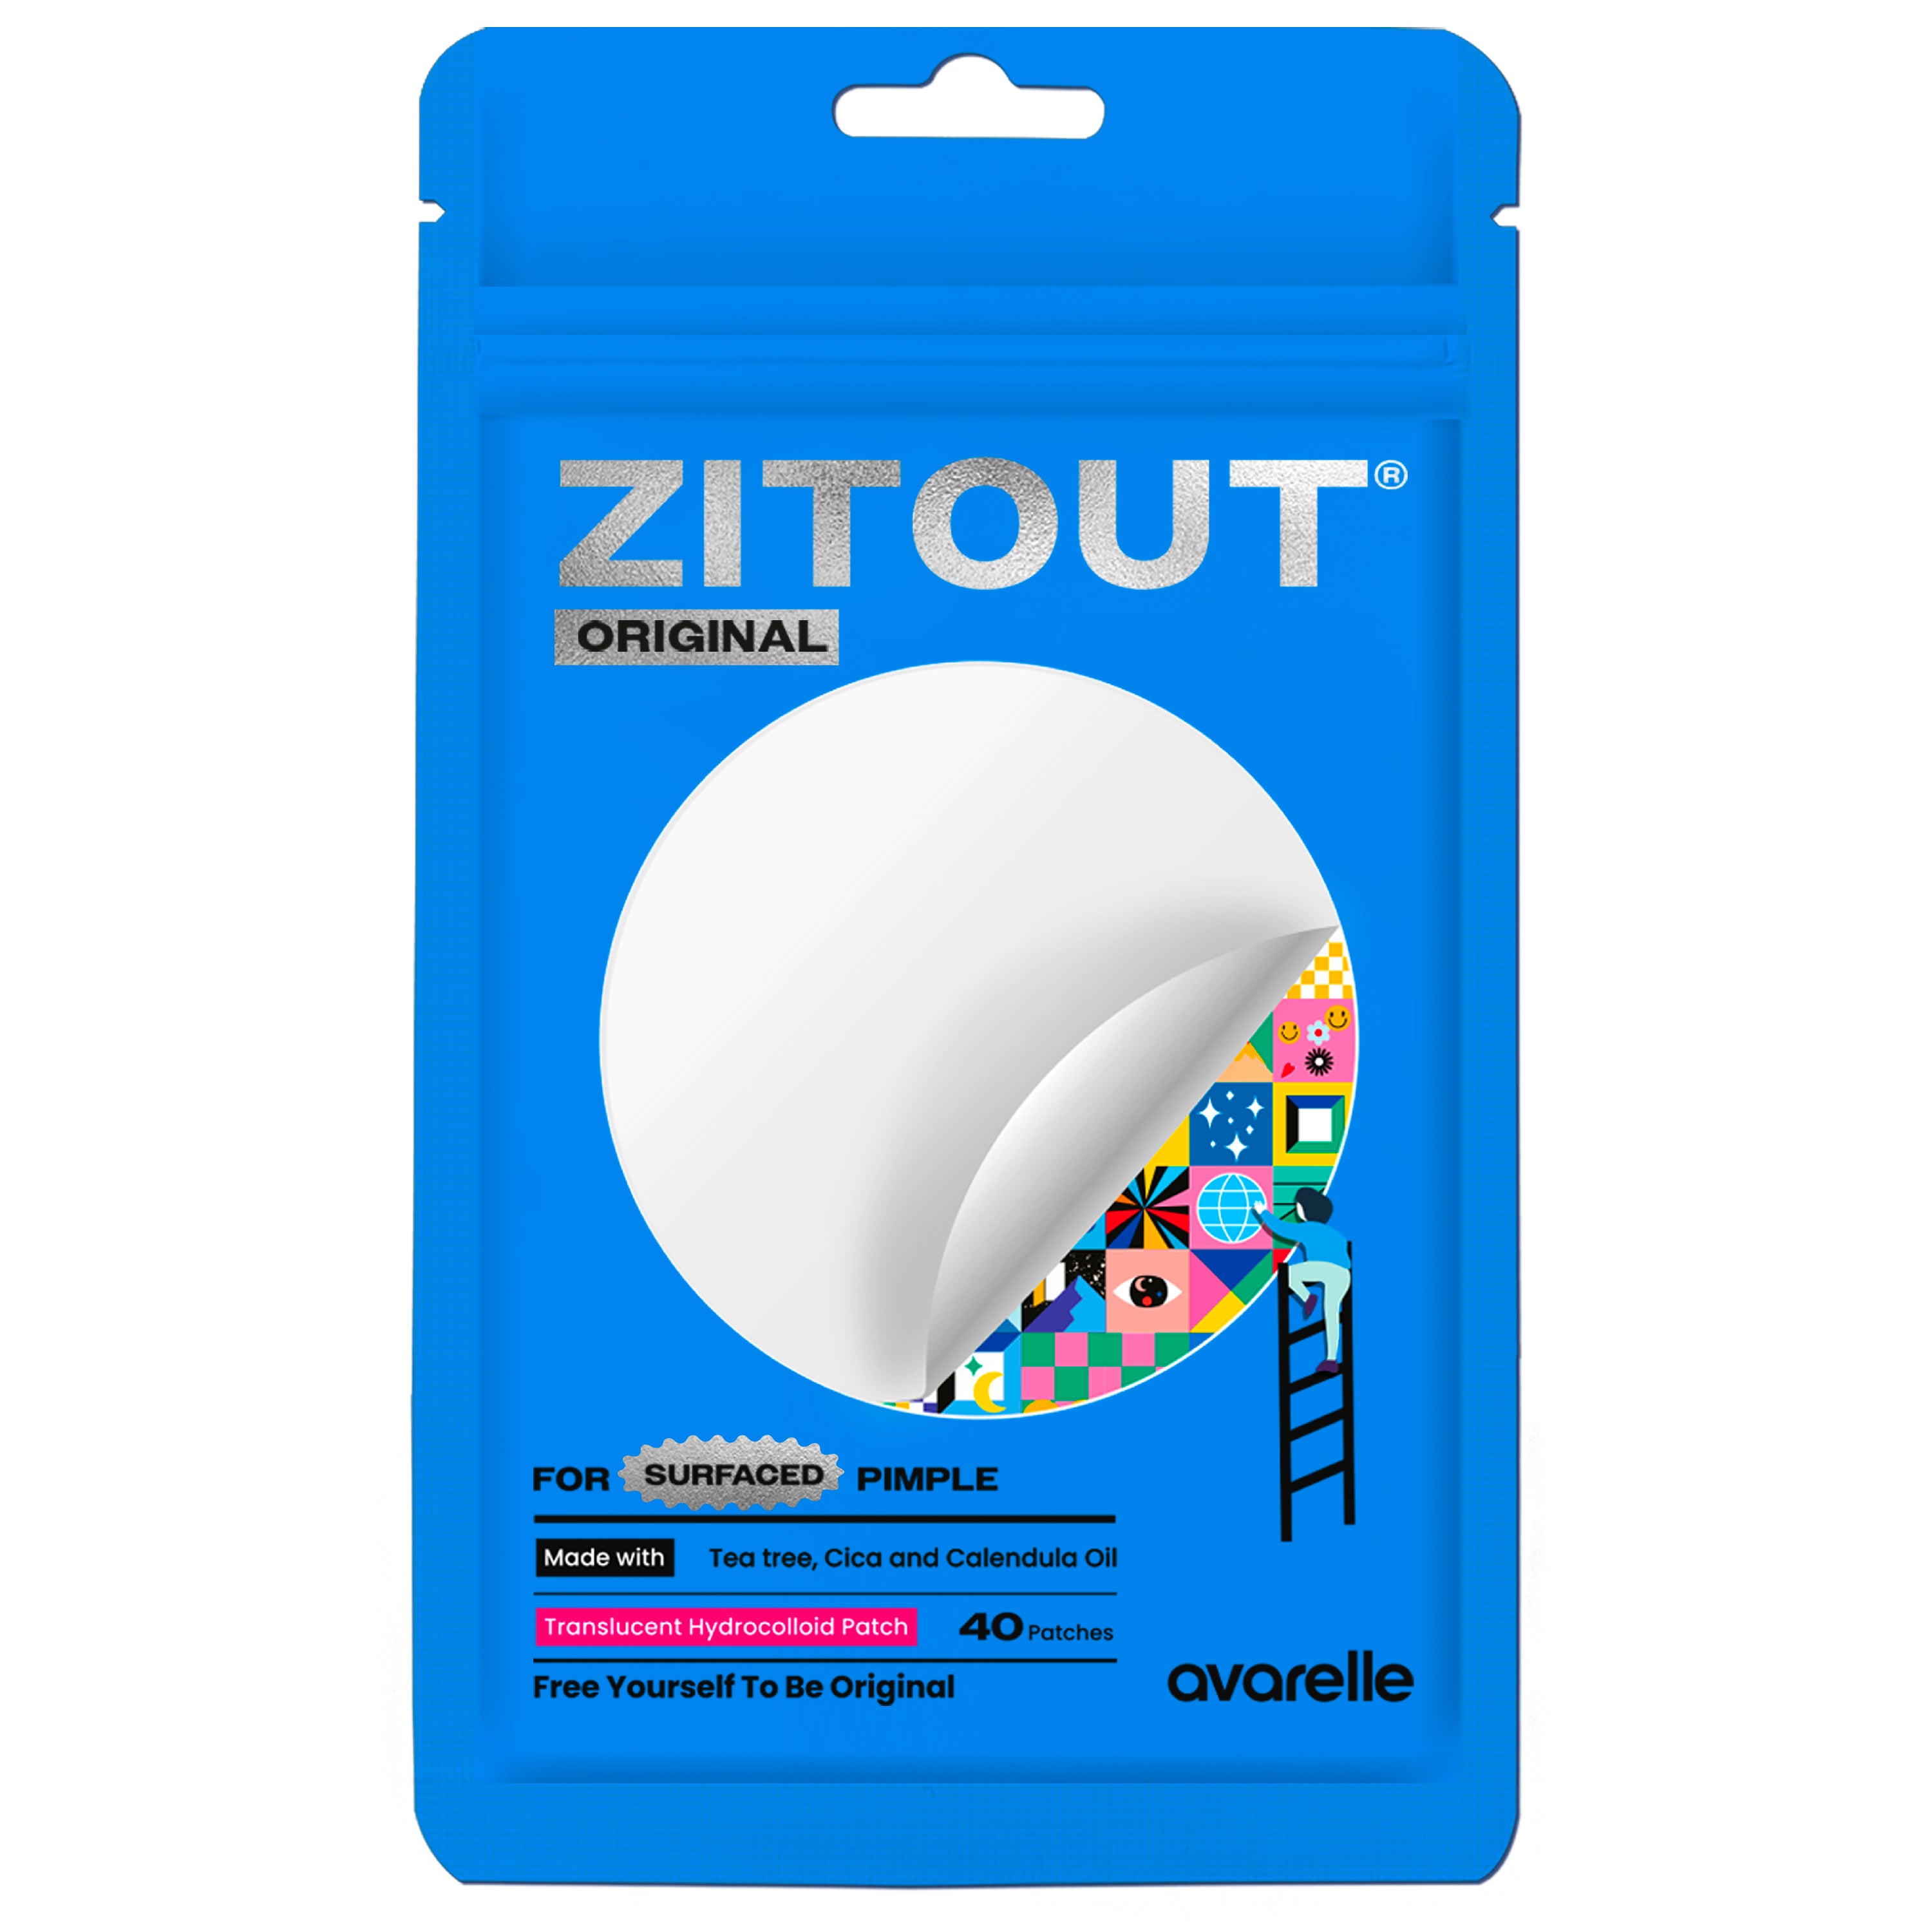 Packaging of Avarelle's ZitOut Original 40 Pimple Patch with ingredients, Tea tree, Cica and Calendula Oil